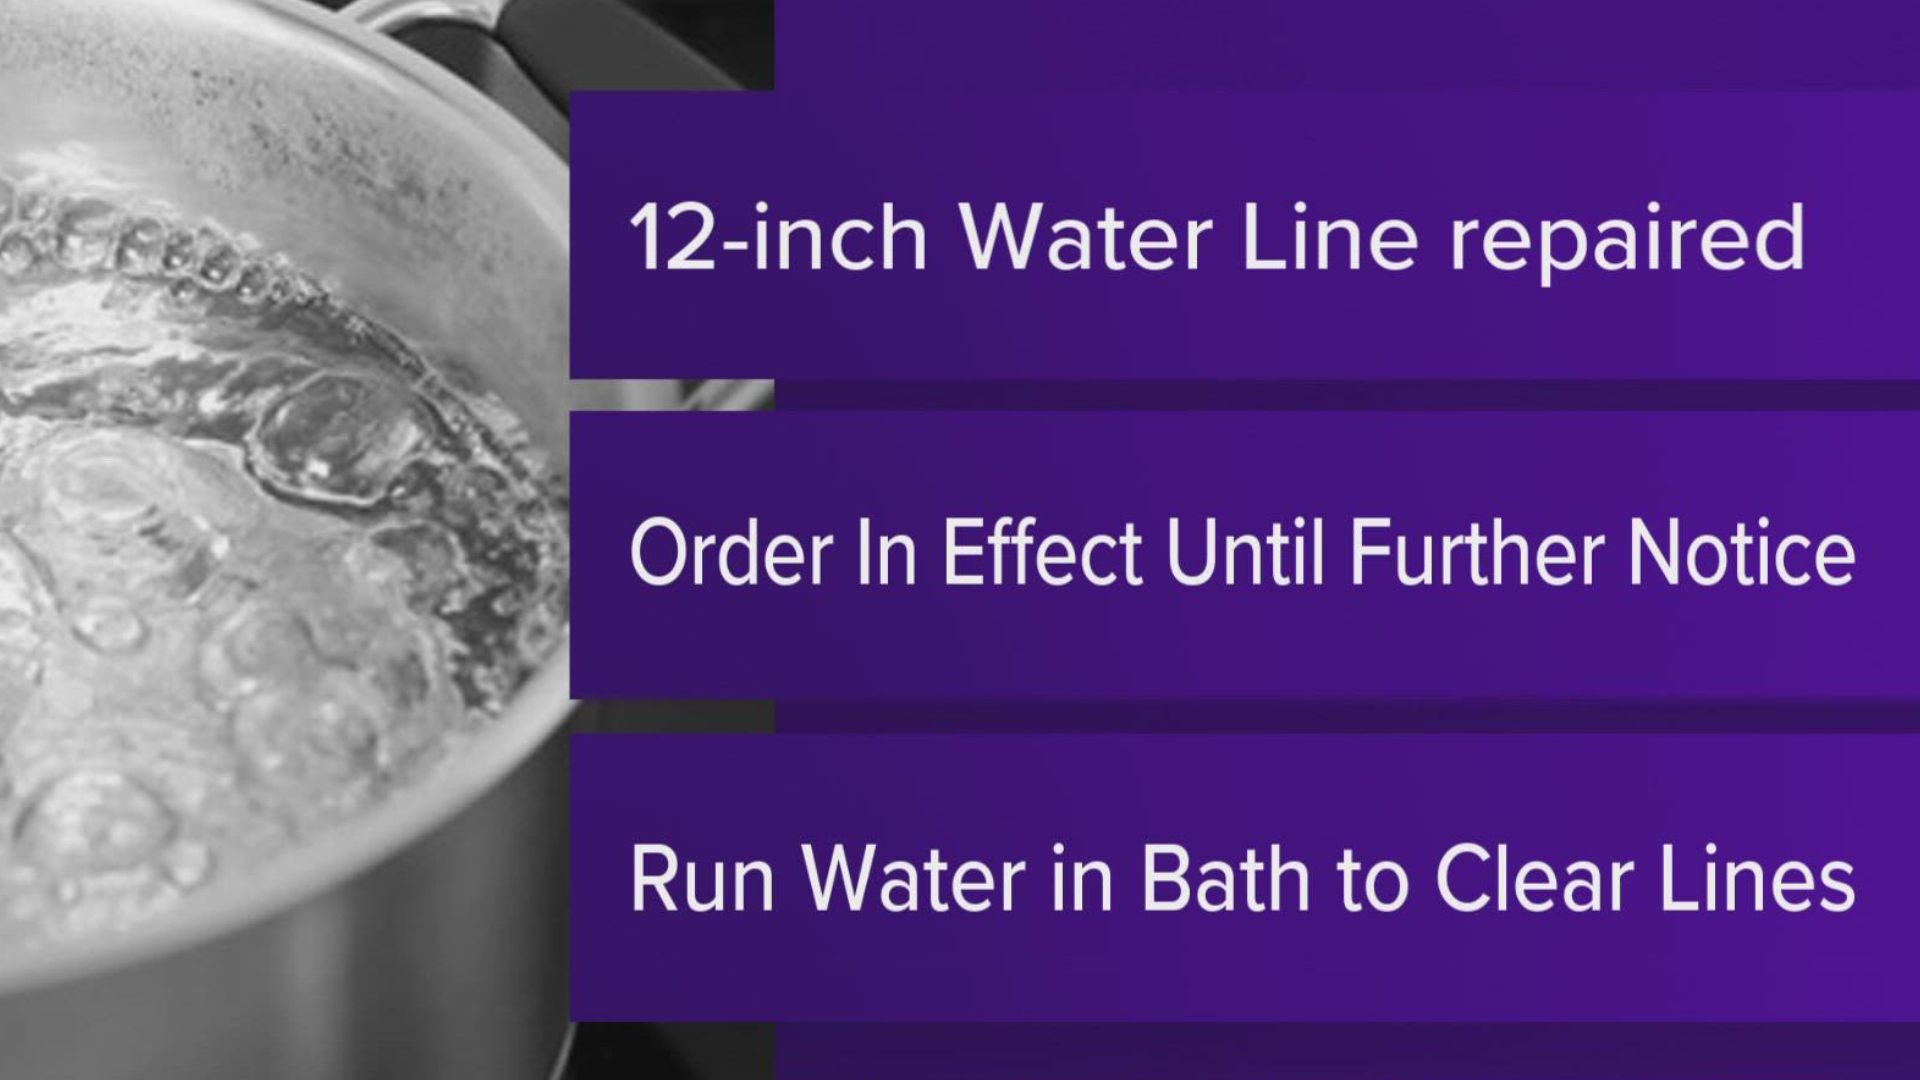 The city says the 12-inch water line has been repaired and service has been restored, but the boil order remains in effect until further notice.